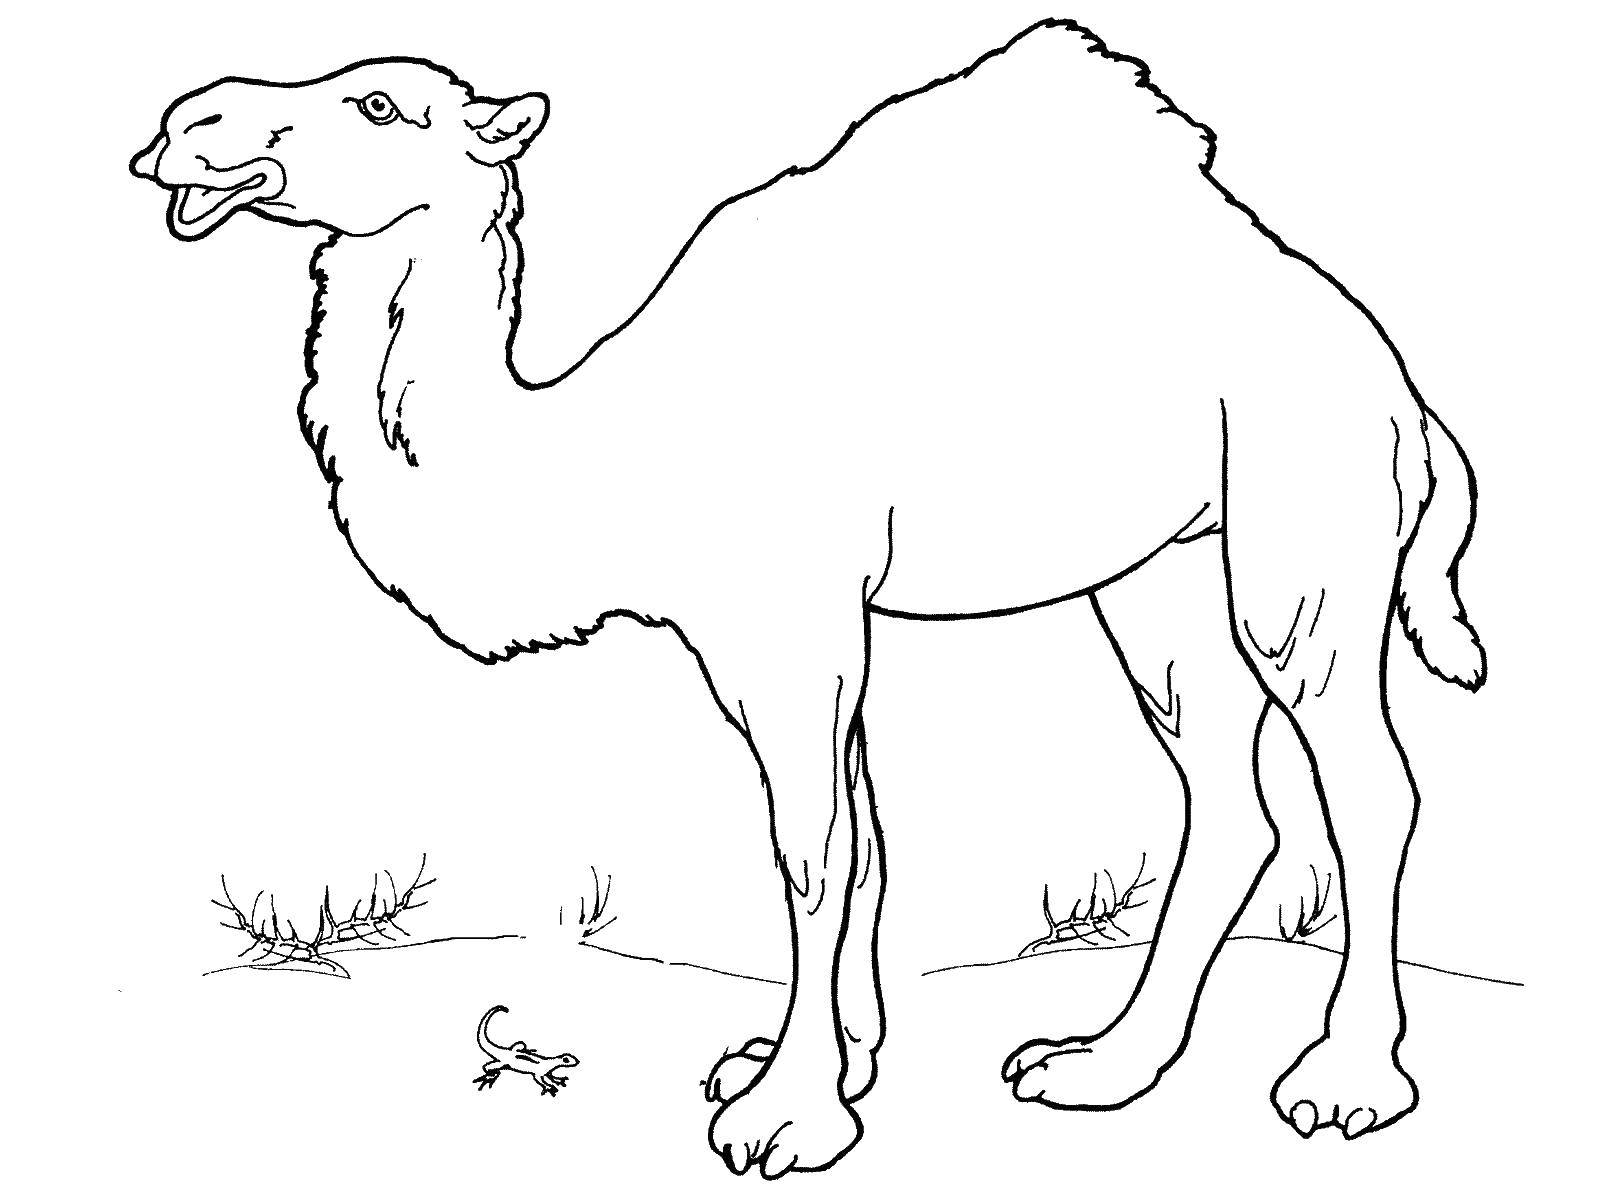 Coloring Camel. Category wild animals. Tags:  Camel.